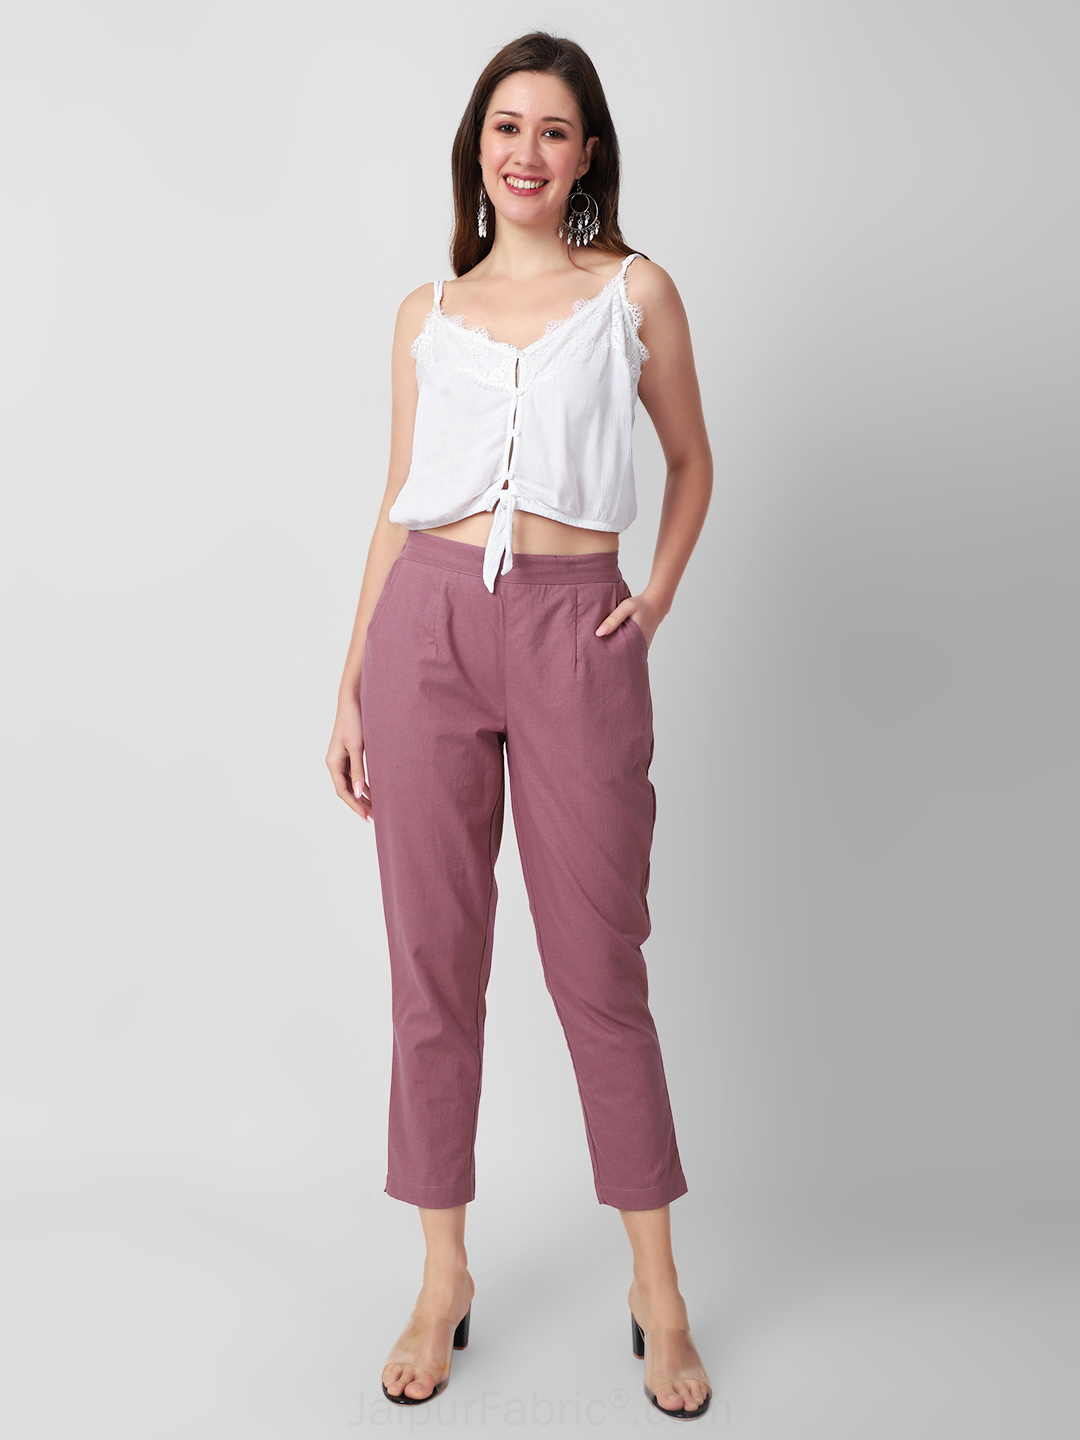 BCG Women's Cotton Wick Athletic Pants | Free Shipping at Academy